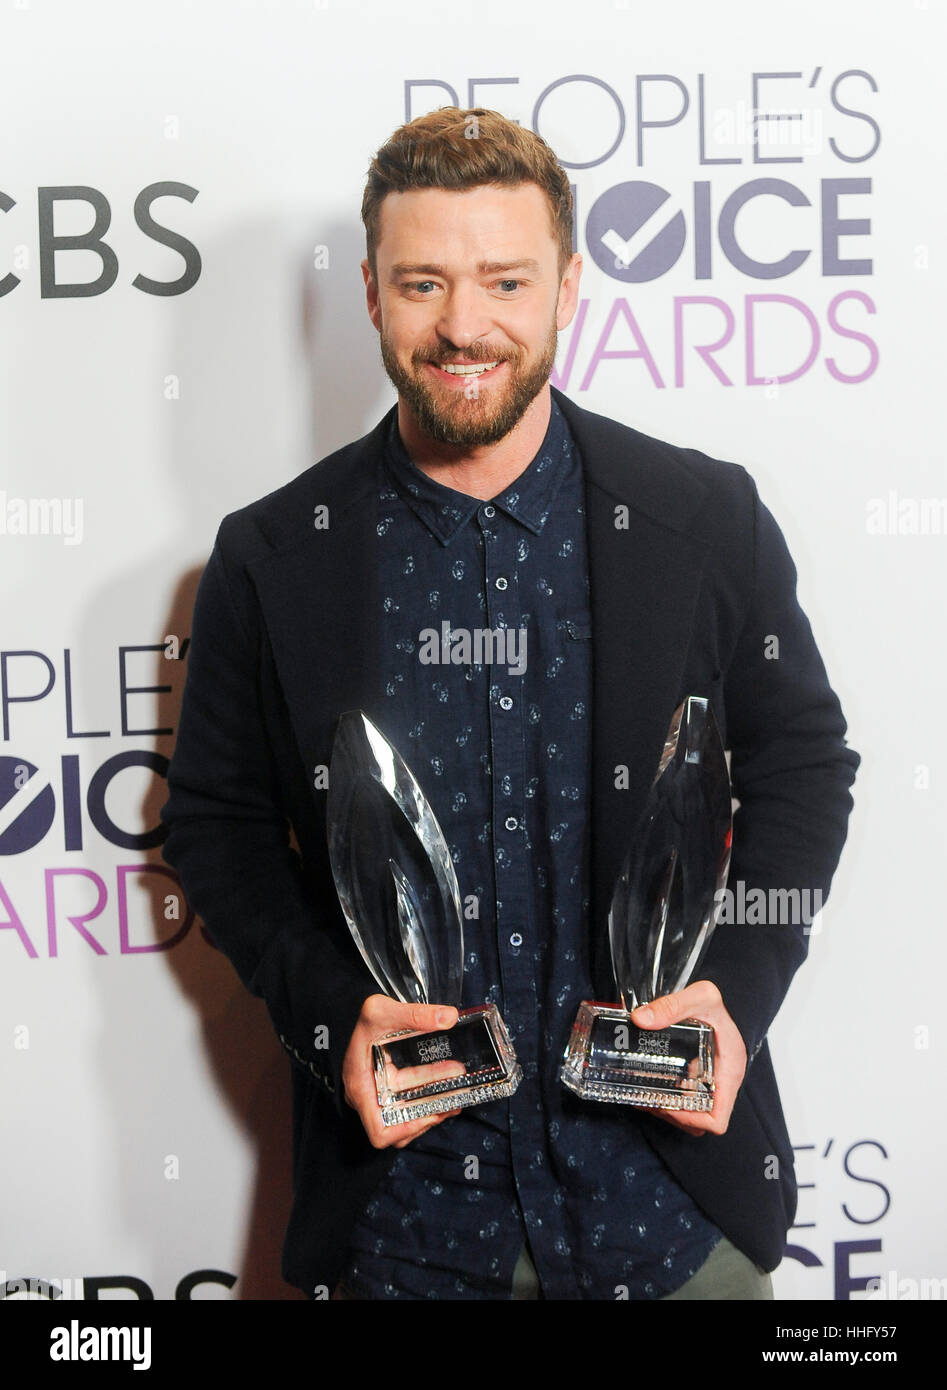 Los Angeles, USA. 18th Jan, 2017. Justin Timberlake poses with the awards for Favorite Male Singer and Favorite Song (Can't Stop the Feeling) of the People's Choice Awards at the Microsoft Theater in Los Angeles, the United States, Jan. 18, 2017. Credit: Zhang Chaoqun/Xinhua/Alamy Live News Stock Photo